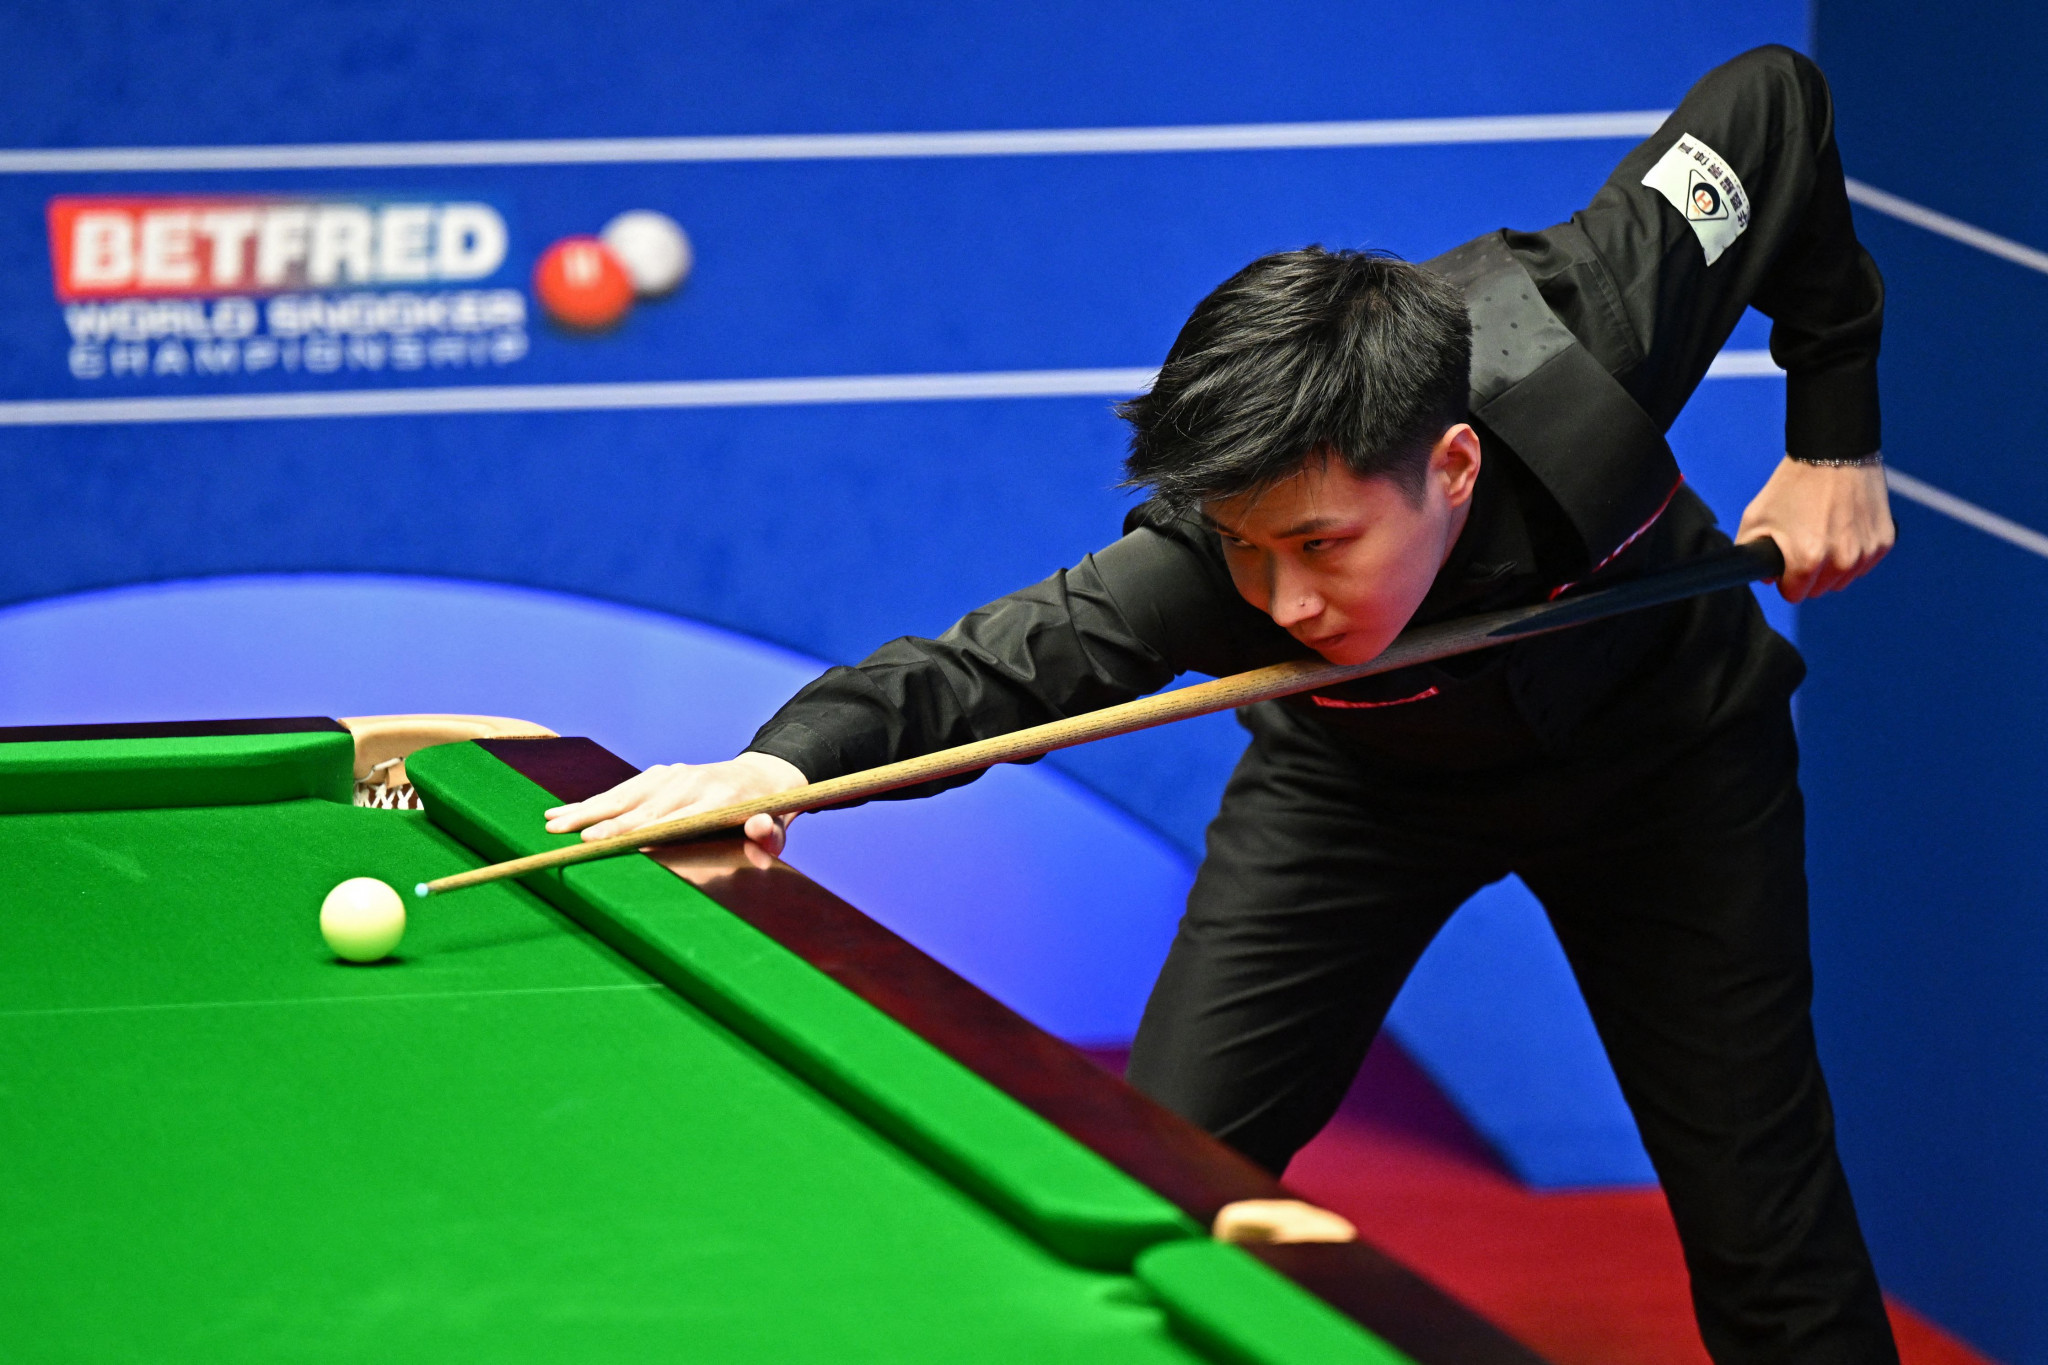 Zhao Xintong, who won the 2021 UK Championship has been banned in connection with fixing and betting on matches ©Getty Images